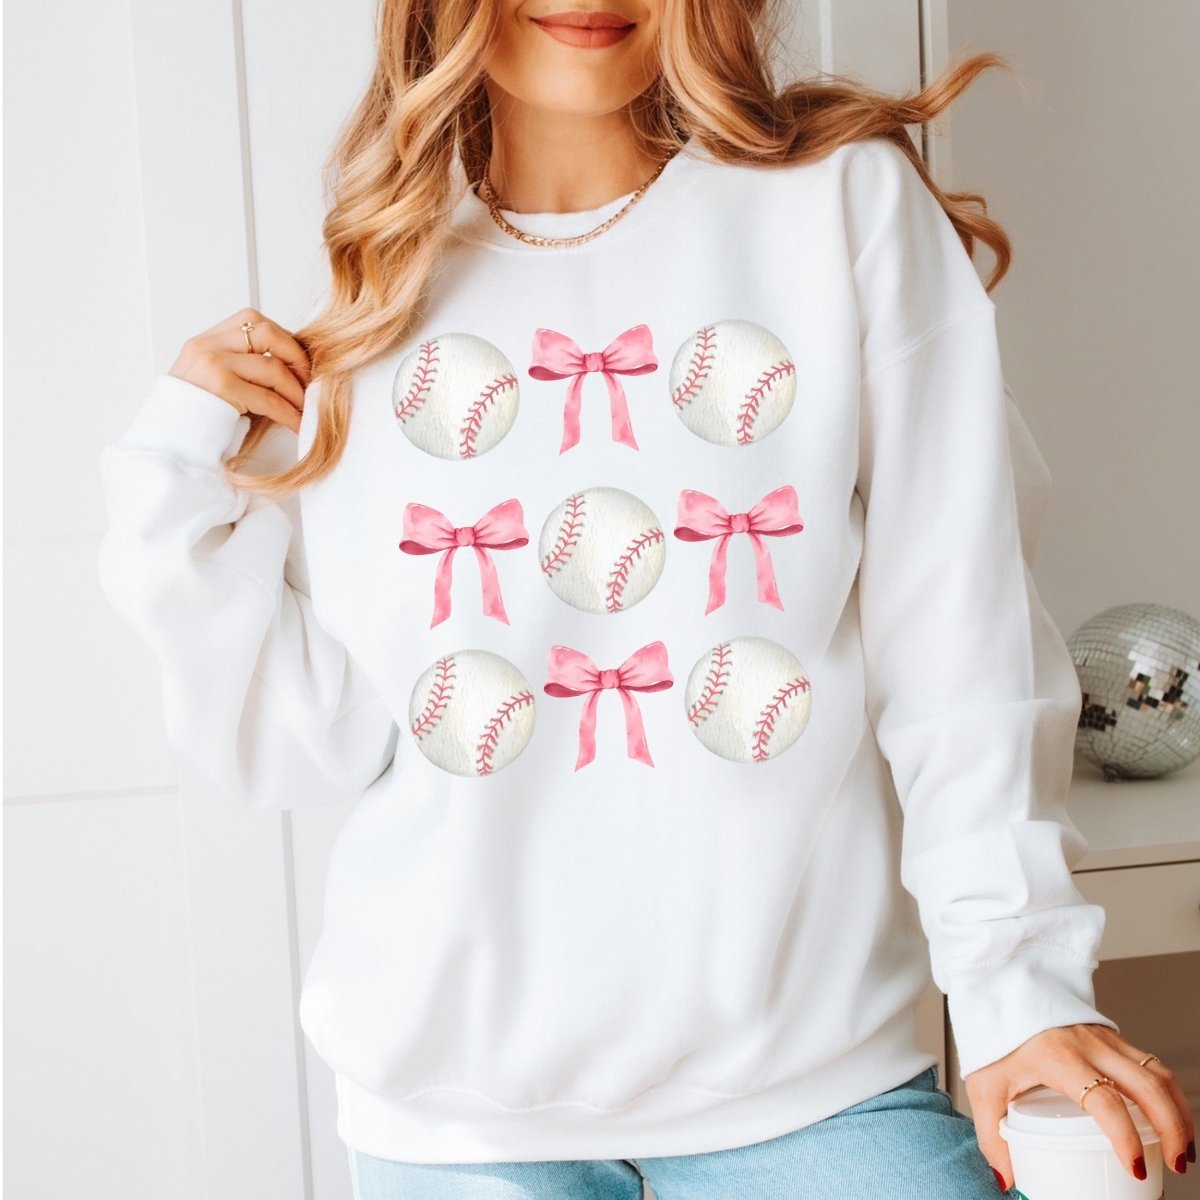 Baseballs And Bows Collage Sweatshirt - Limeberry Designs